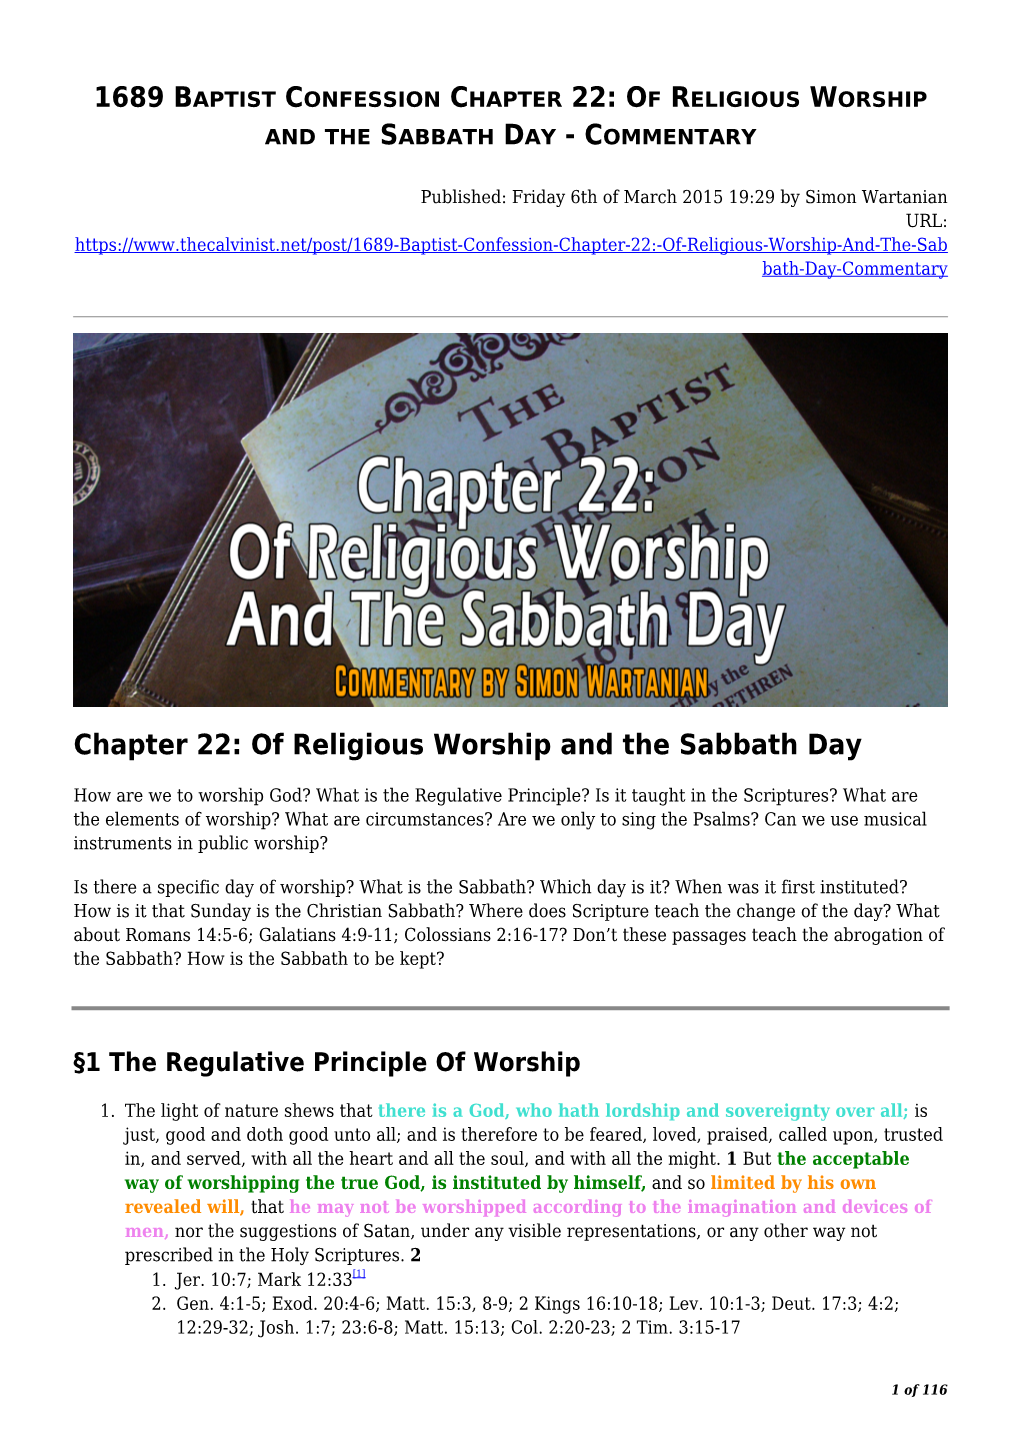 Chapter 22: of Religious Worship and the Sabbath Day - Commentary